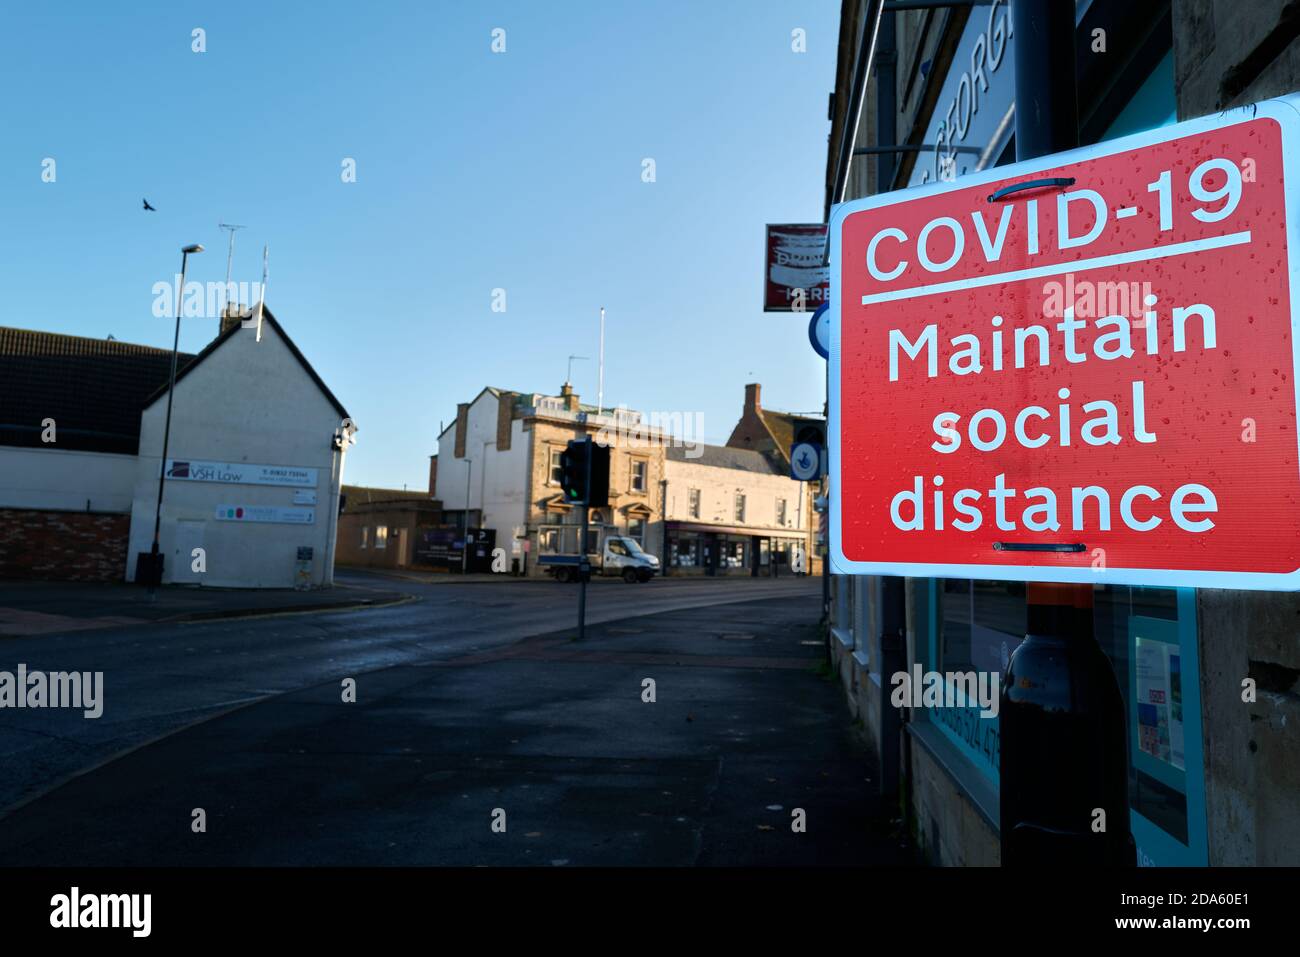 Notice on a post in the market town of Thrapston, Engand, about keeping social distance to stop the spread of coronavirus, October 2020. Stock Photo